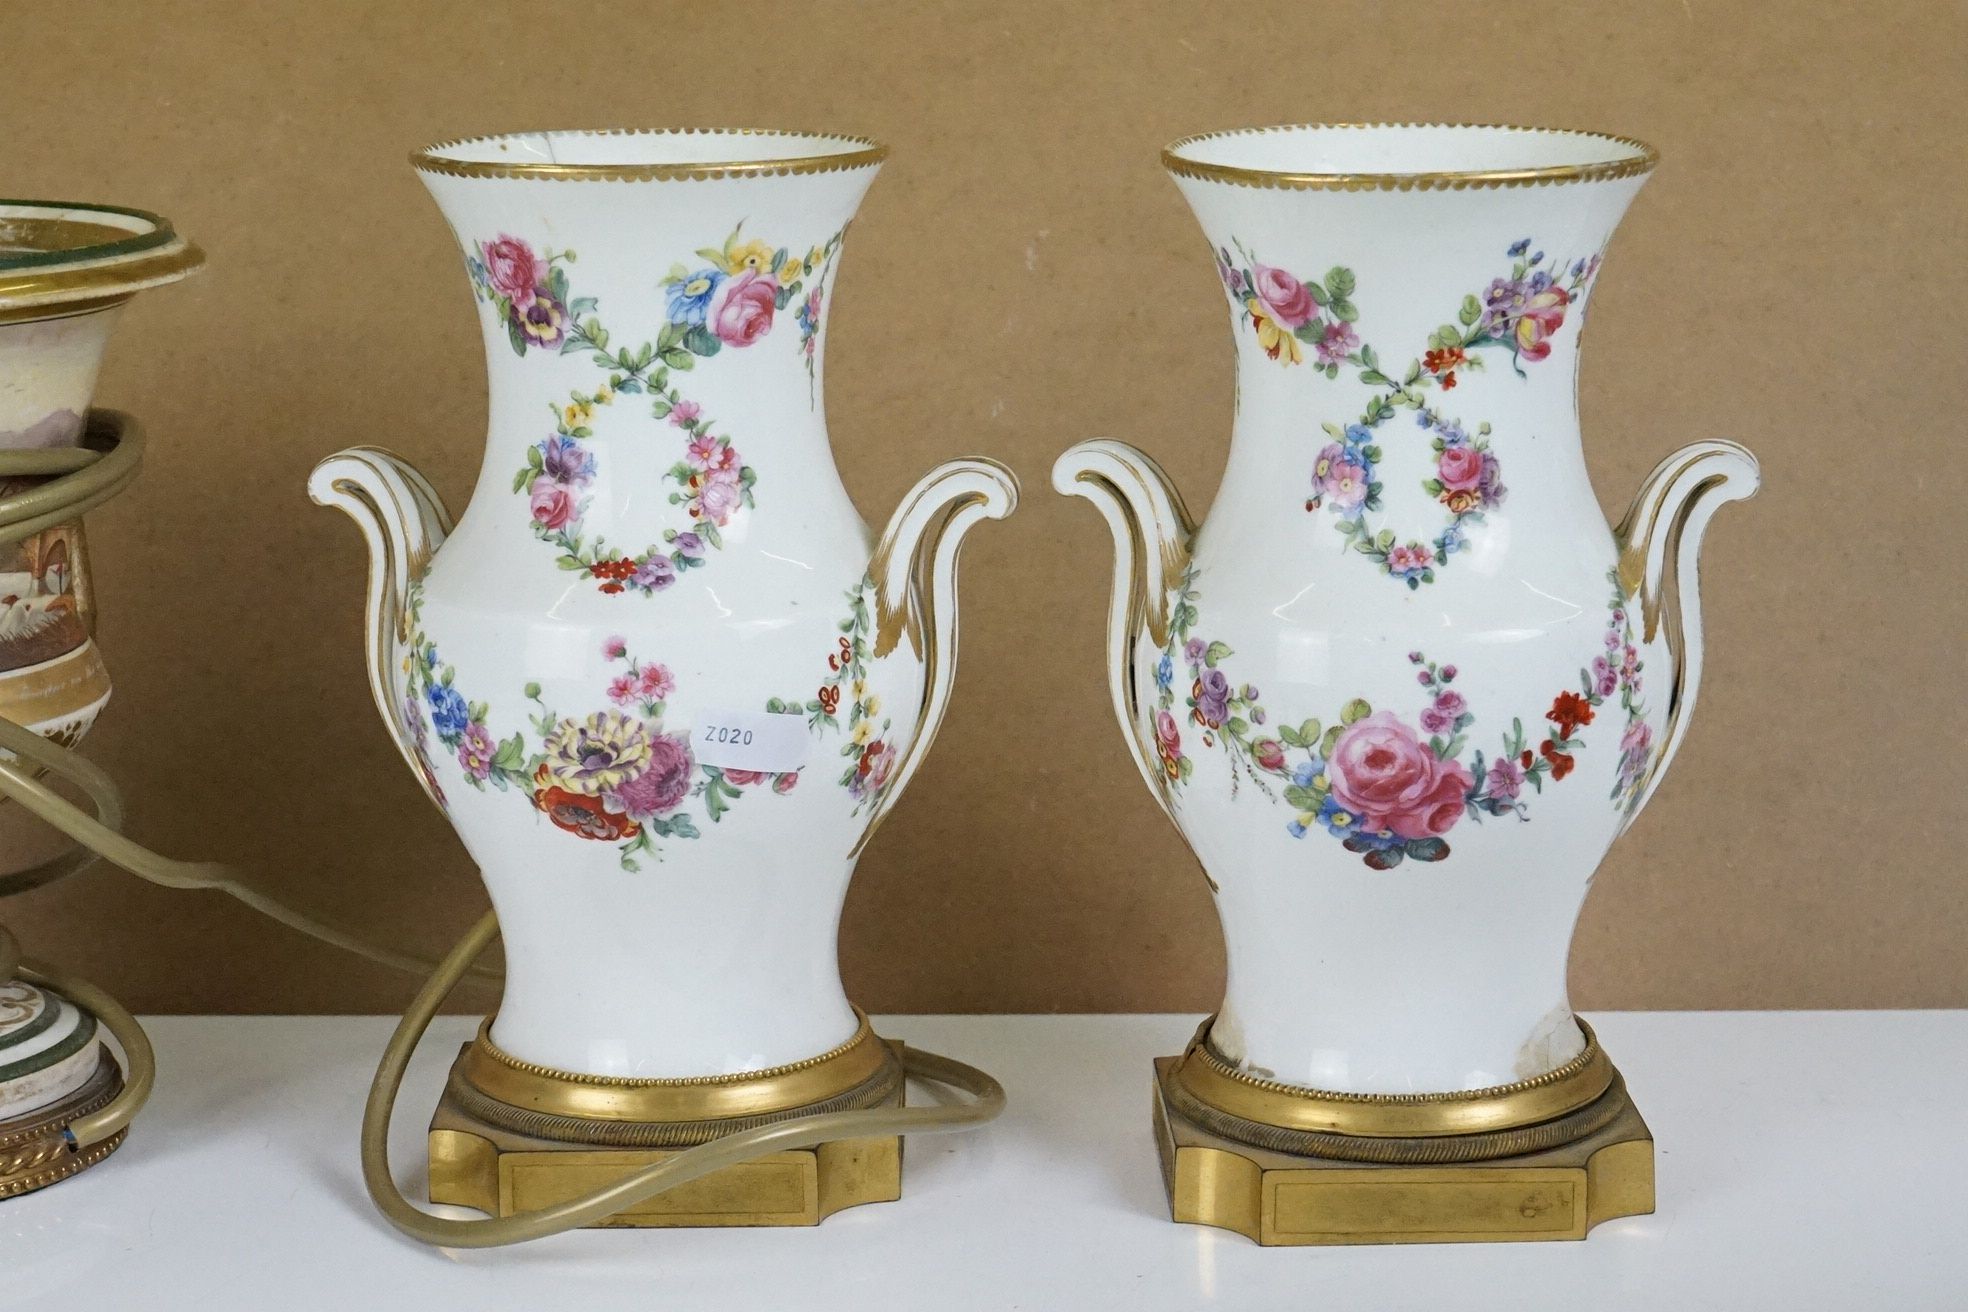 Set of Three 19th Century Bloor Derby twin-handled footed sauce tureens & covers with hand painted - Image 9 of 10